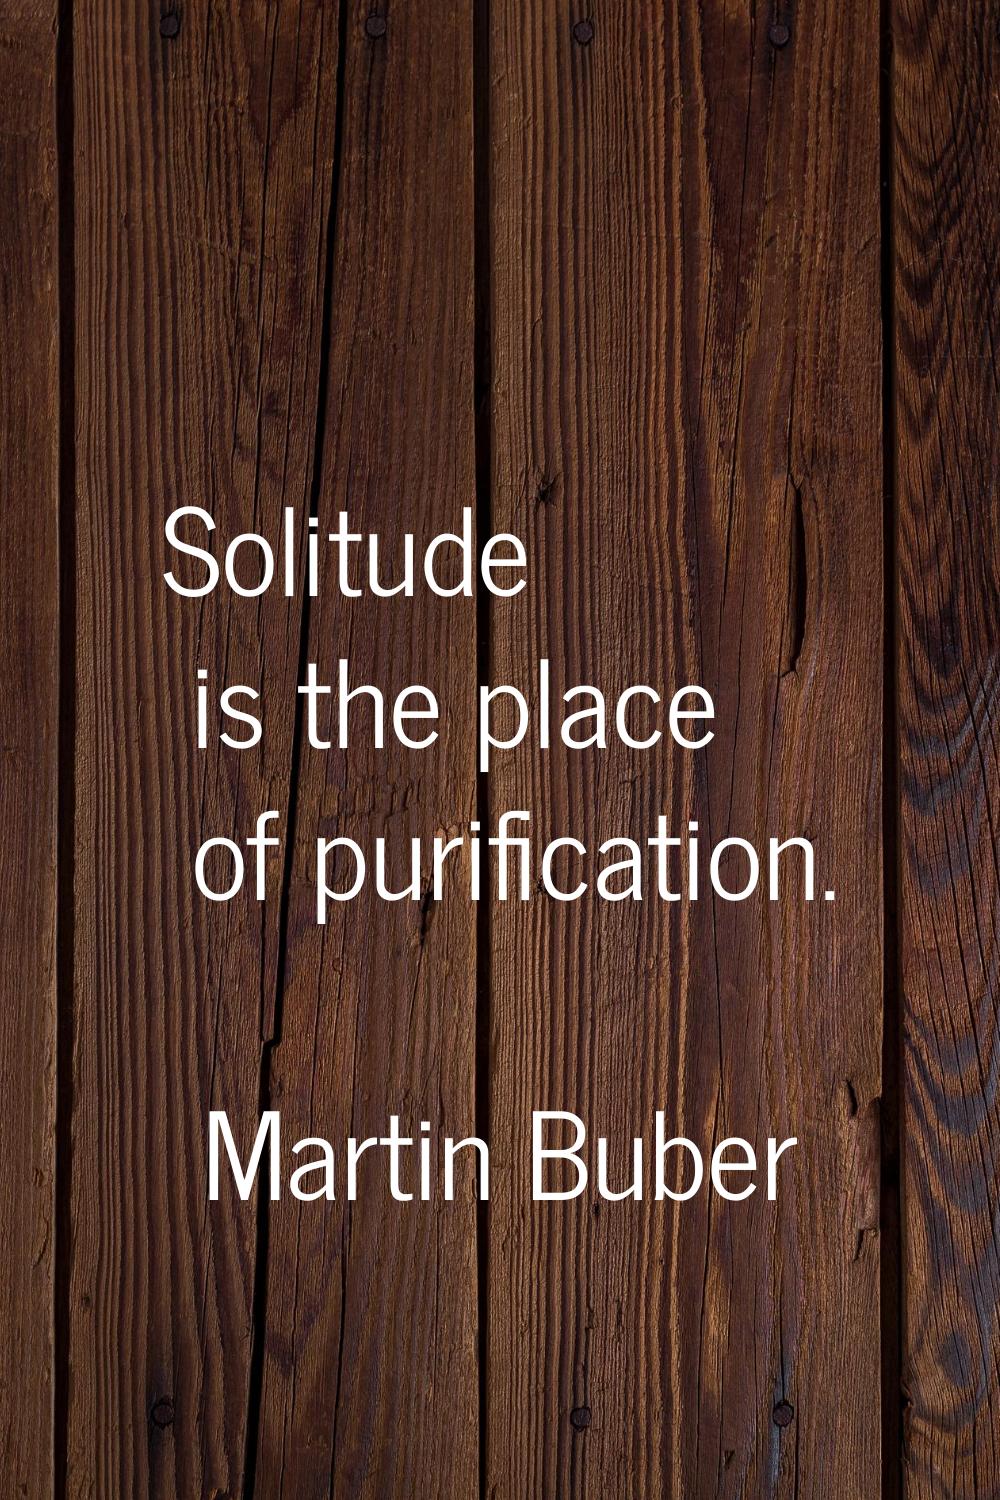 Solitude is the place of purification.